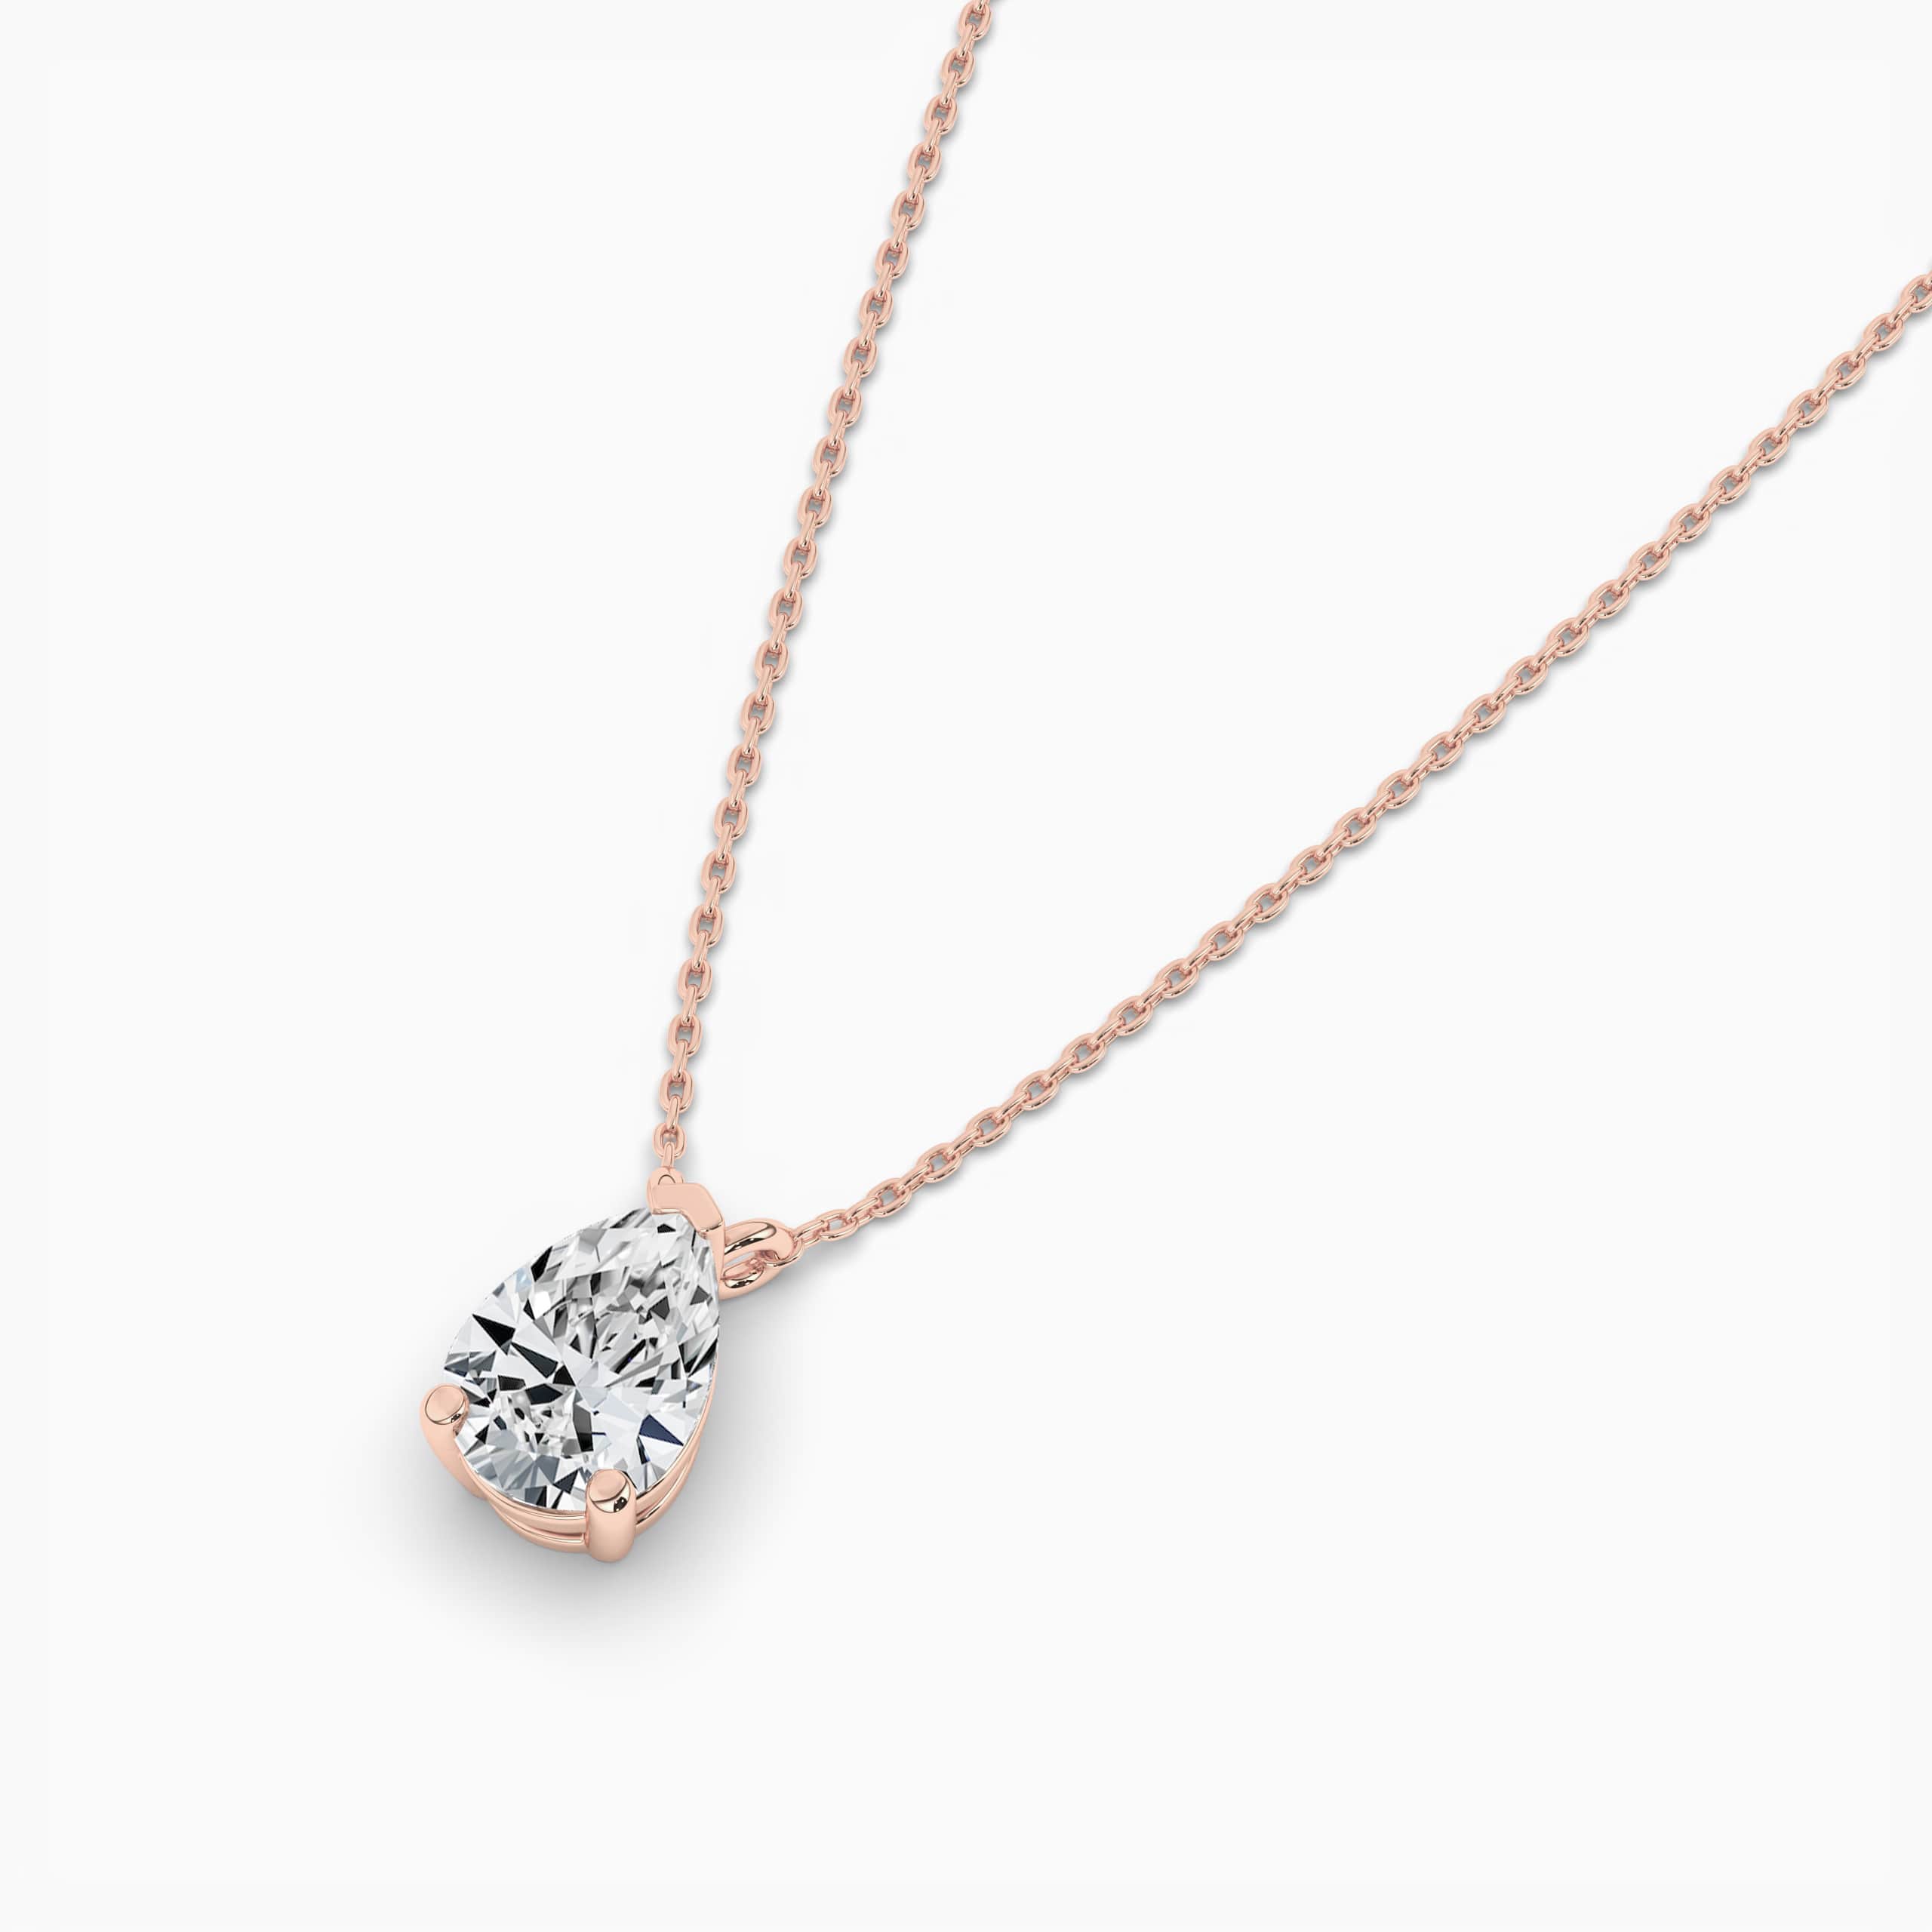  Solitaire Pear Diamond Necklace in Rose Gold